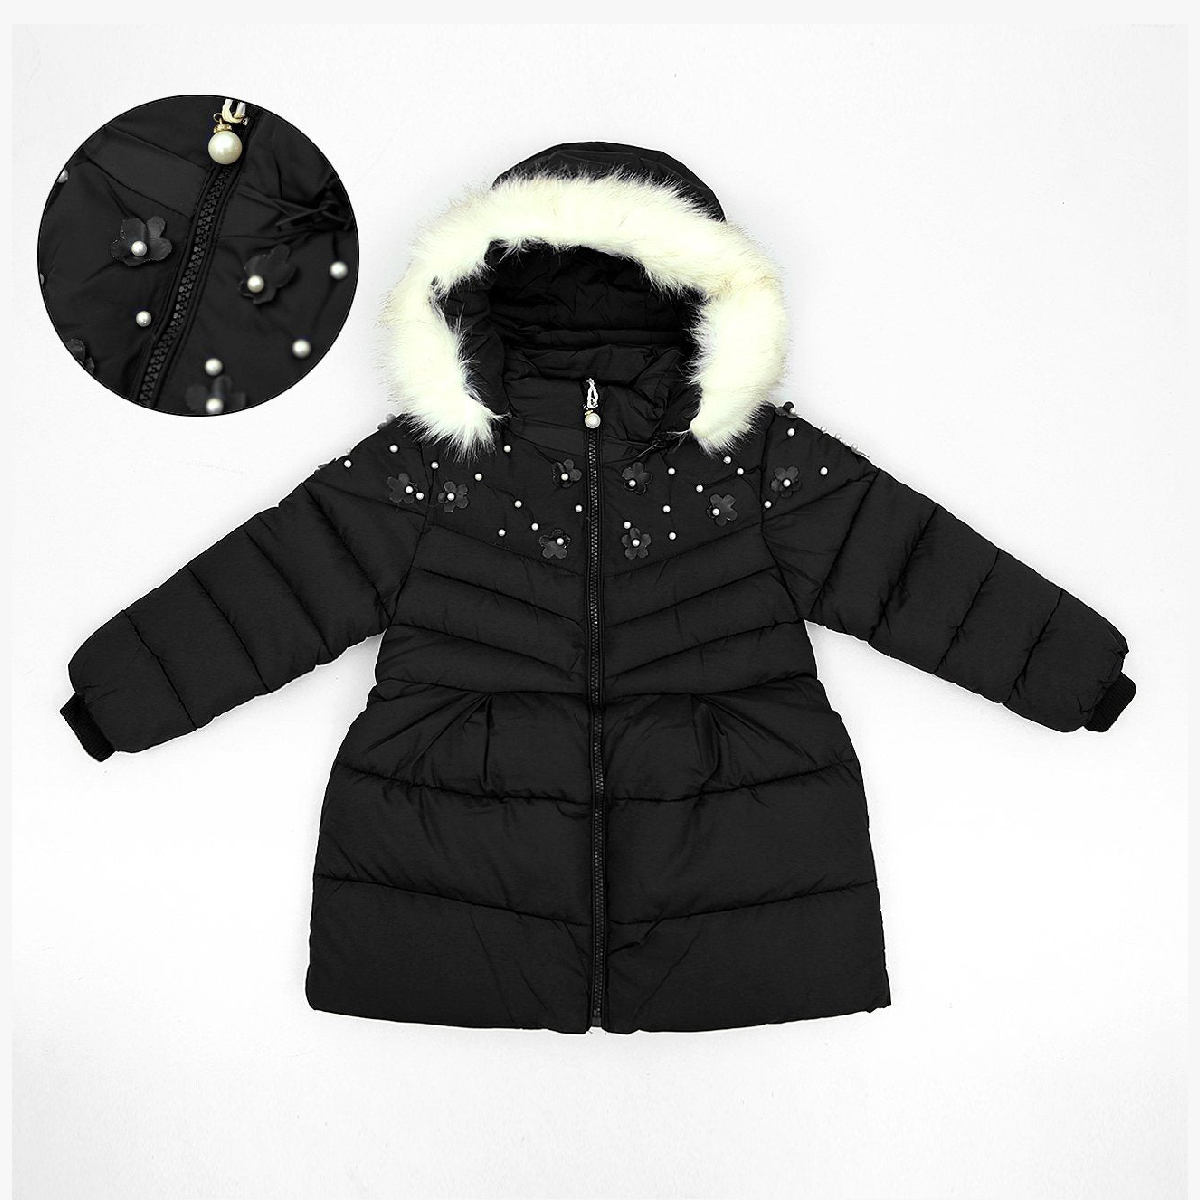 https://www.peekaboo.pk/wp-content/uploads/2021/12/BLACK-FANCY-QUILTED-PUFFER-JACKET-WITH-HOODIE-FOR-GIRLS.jpg